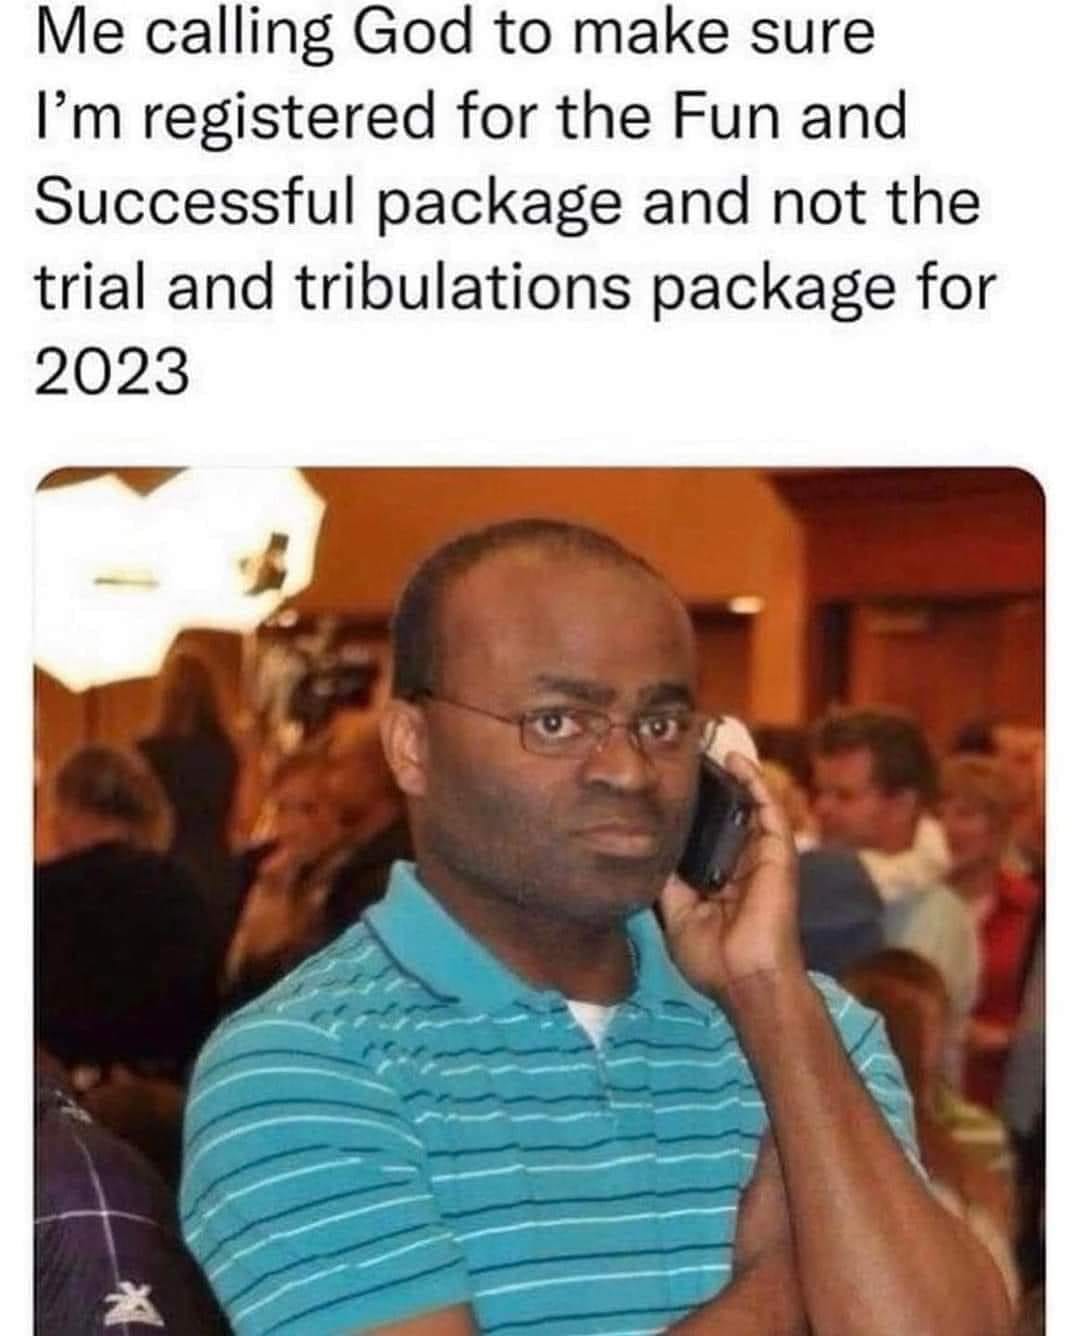 May be an image of 1 person and text that says 'Me calling God to make sure I'm registered for the Fun and Successful package and not the trial and tribulations package for 2023'